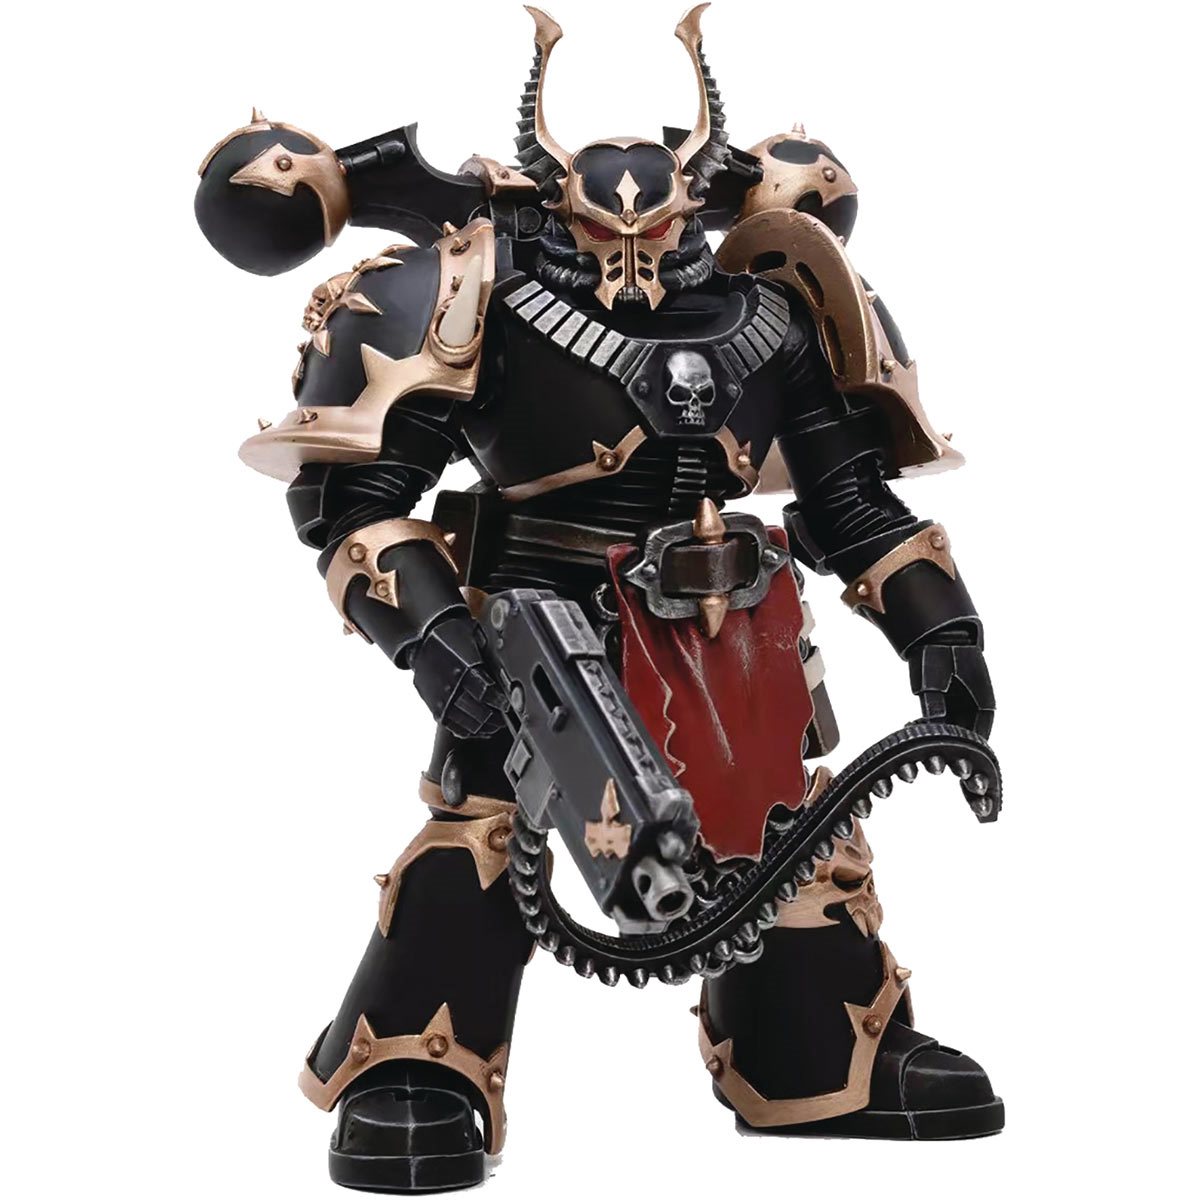 Latest Changes To 1:18 Scale JOYTOY Warhammer 40k Action Figures 